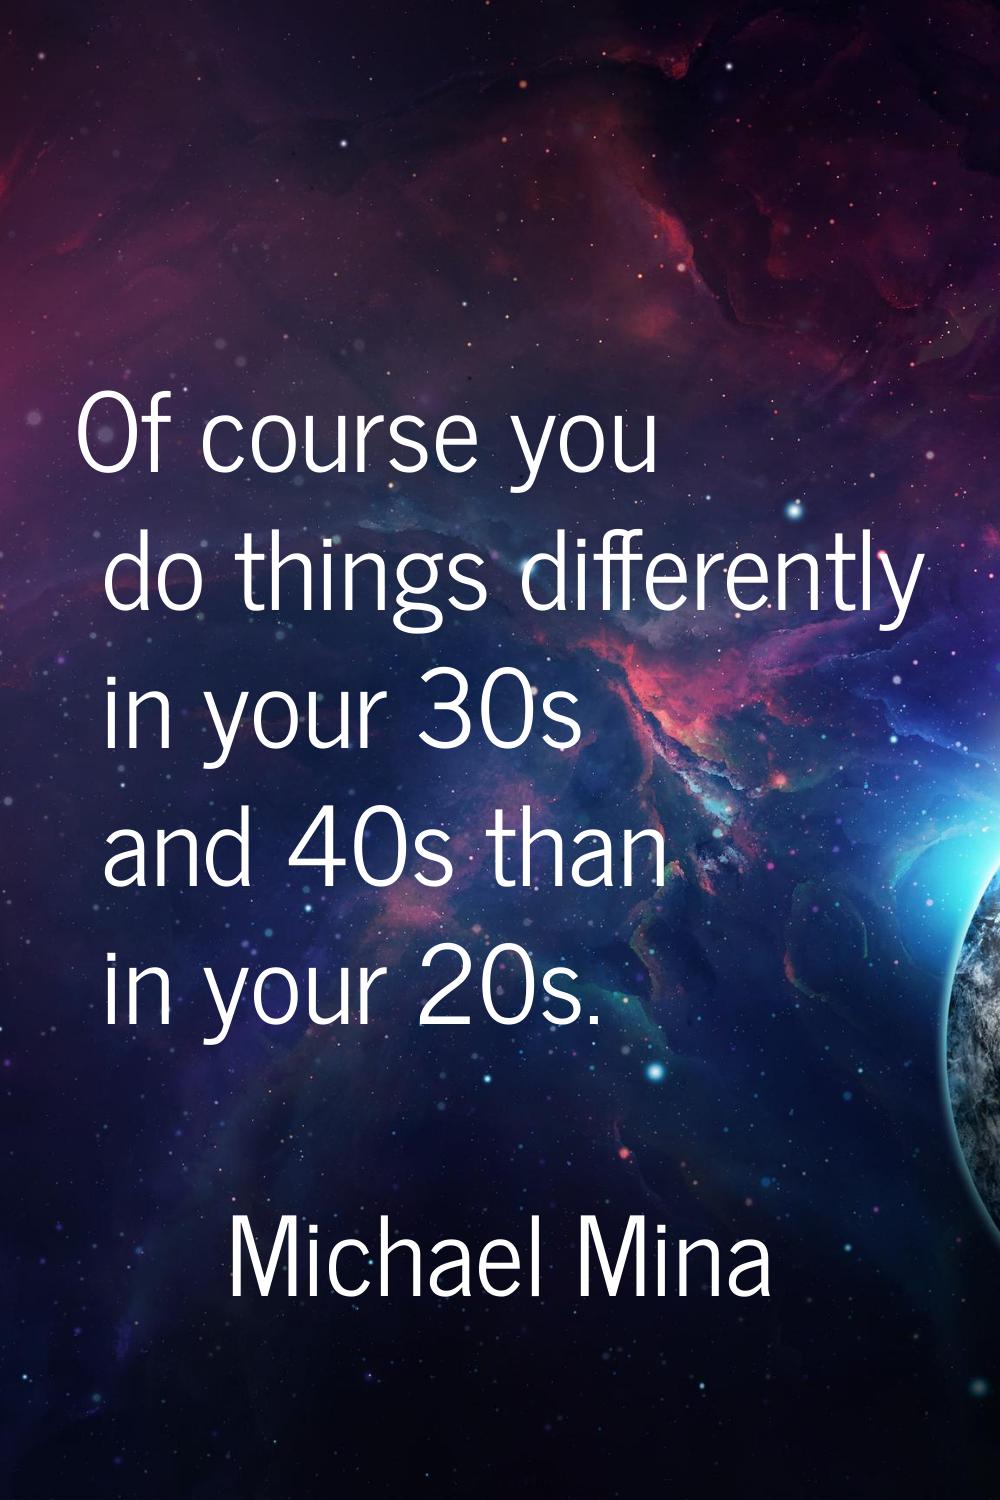 Of course you do things differently in your 30s and 40s than in your 20s.